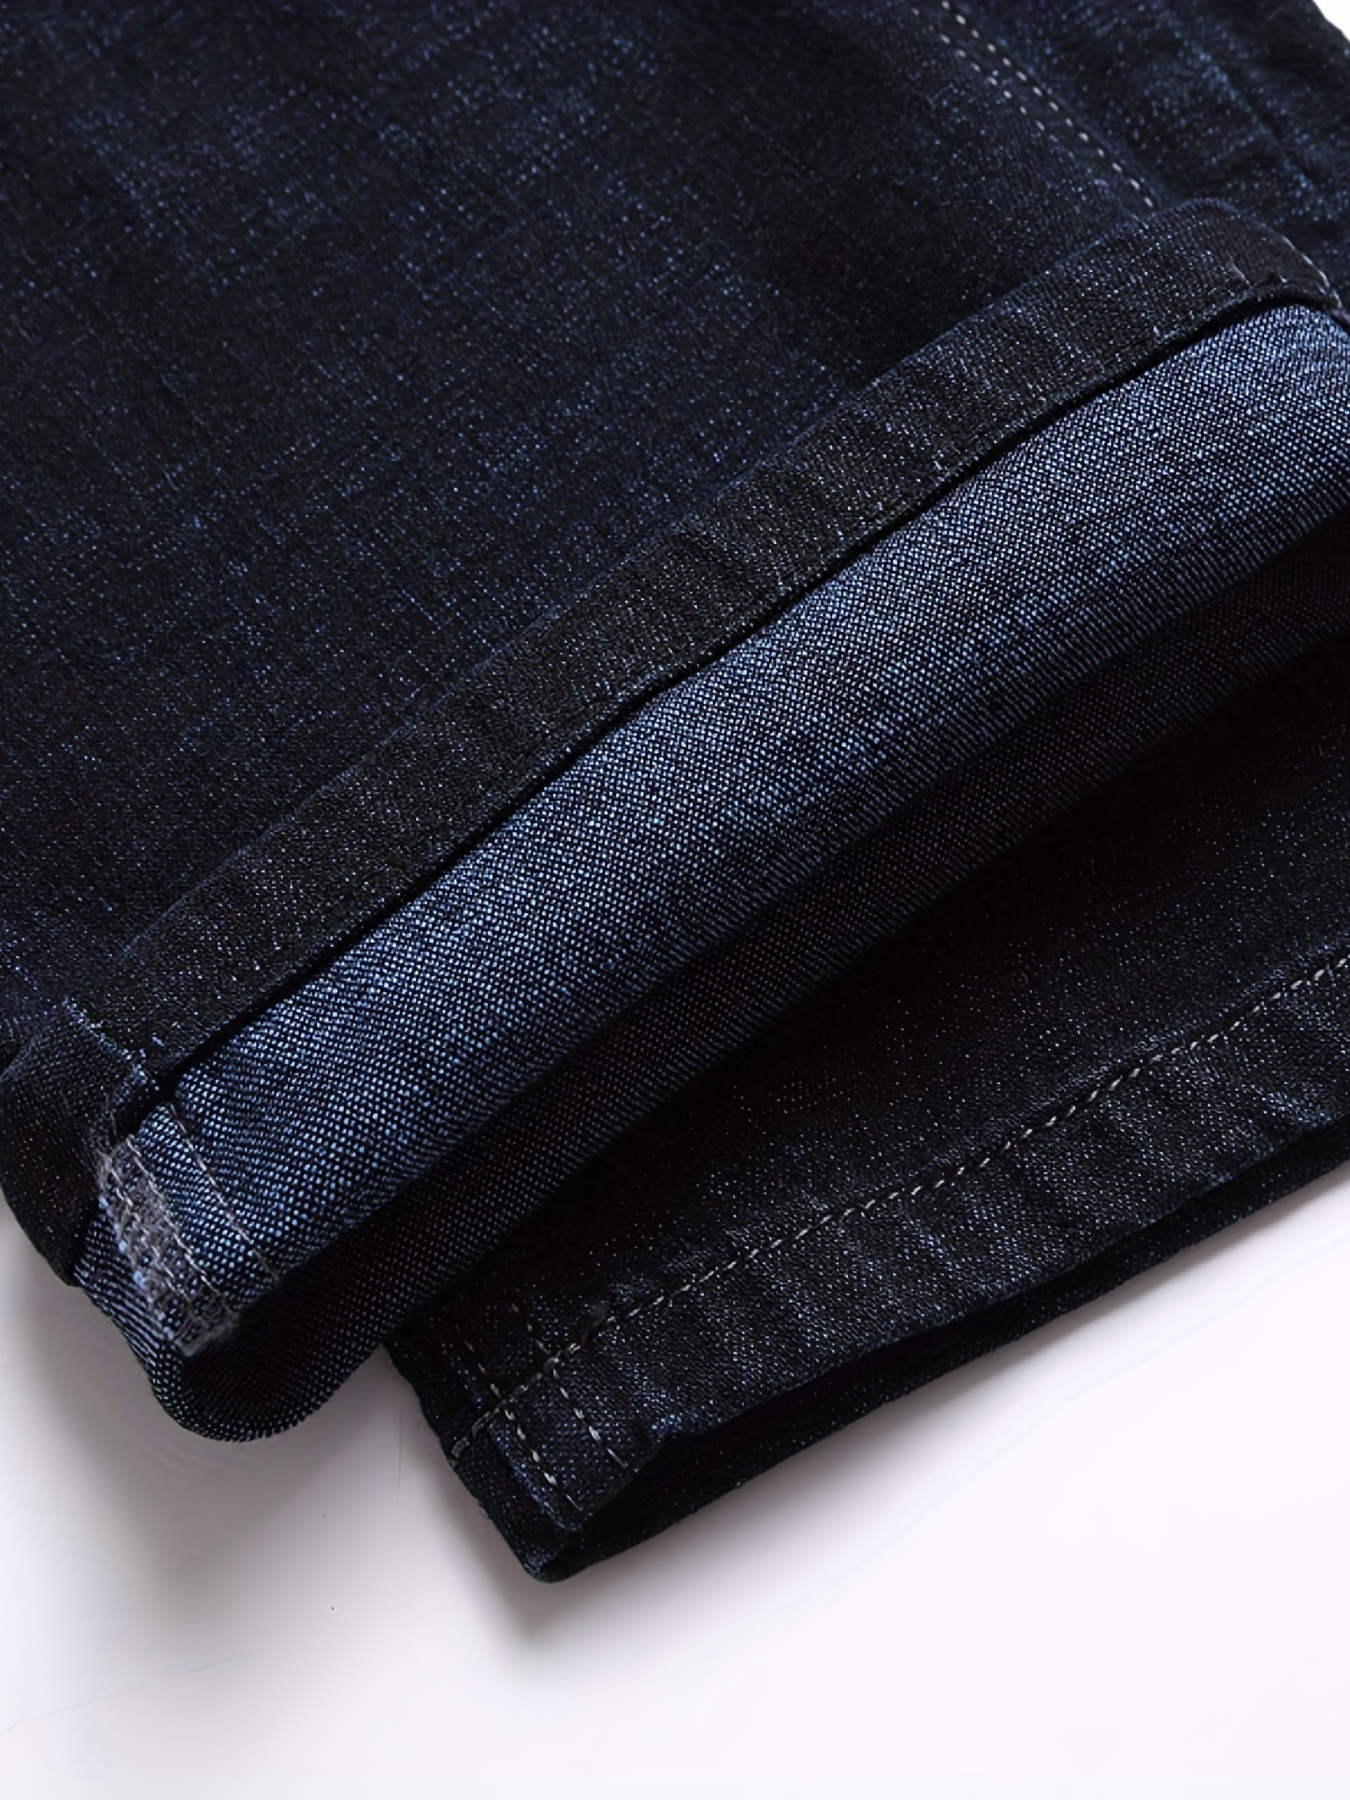  YUNJING Pant Stretcher for Jeans with Alloy Aluminium